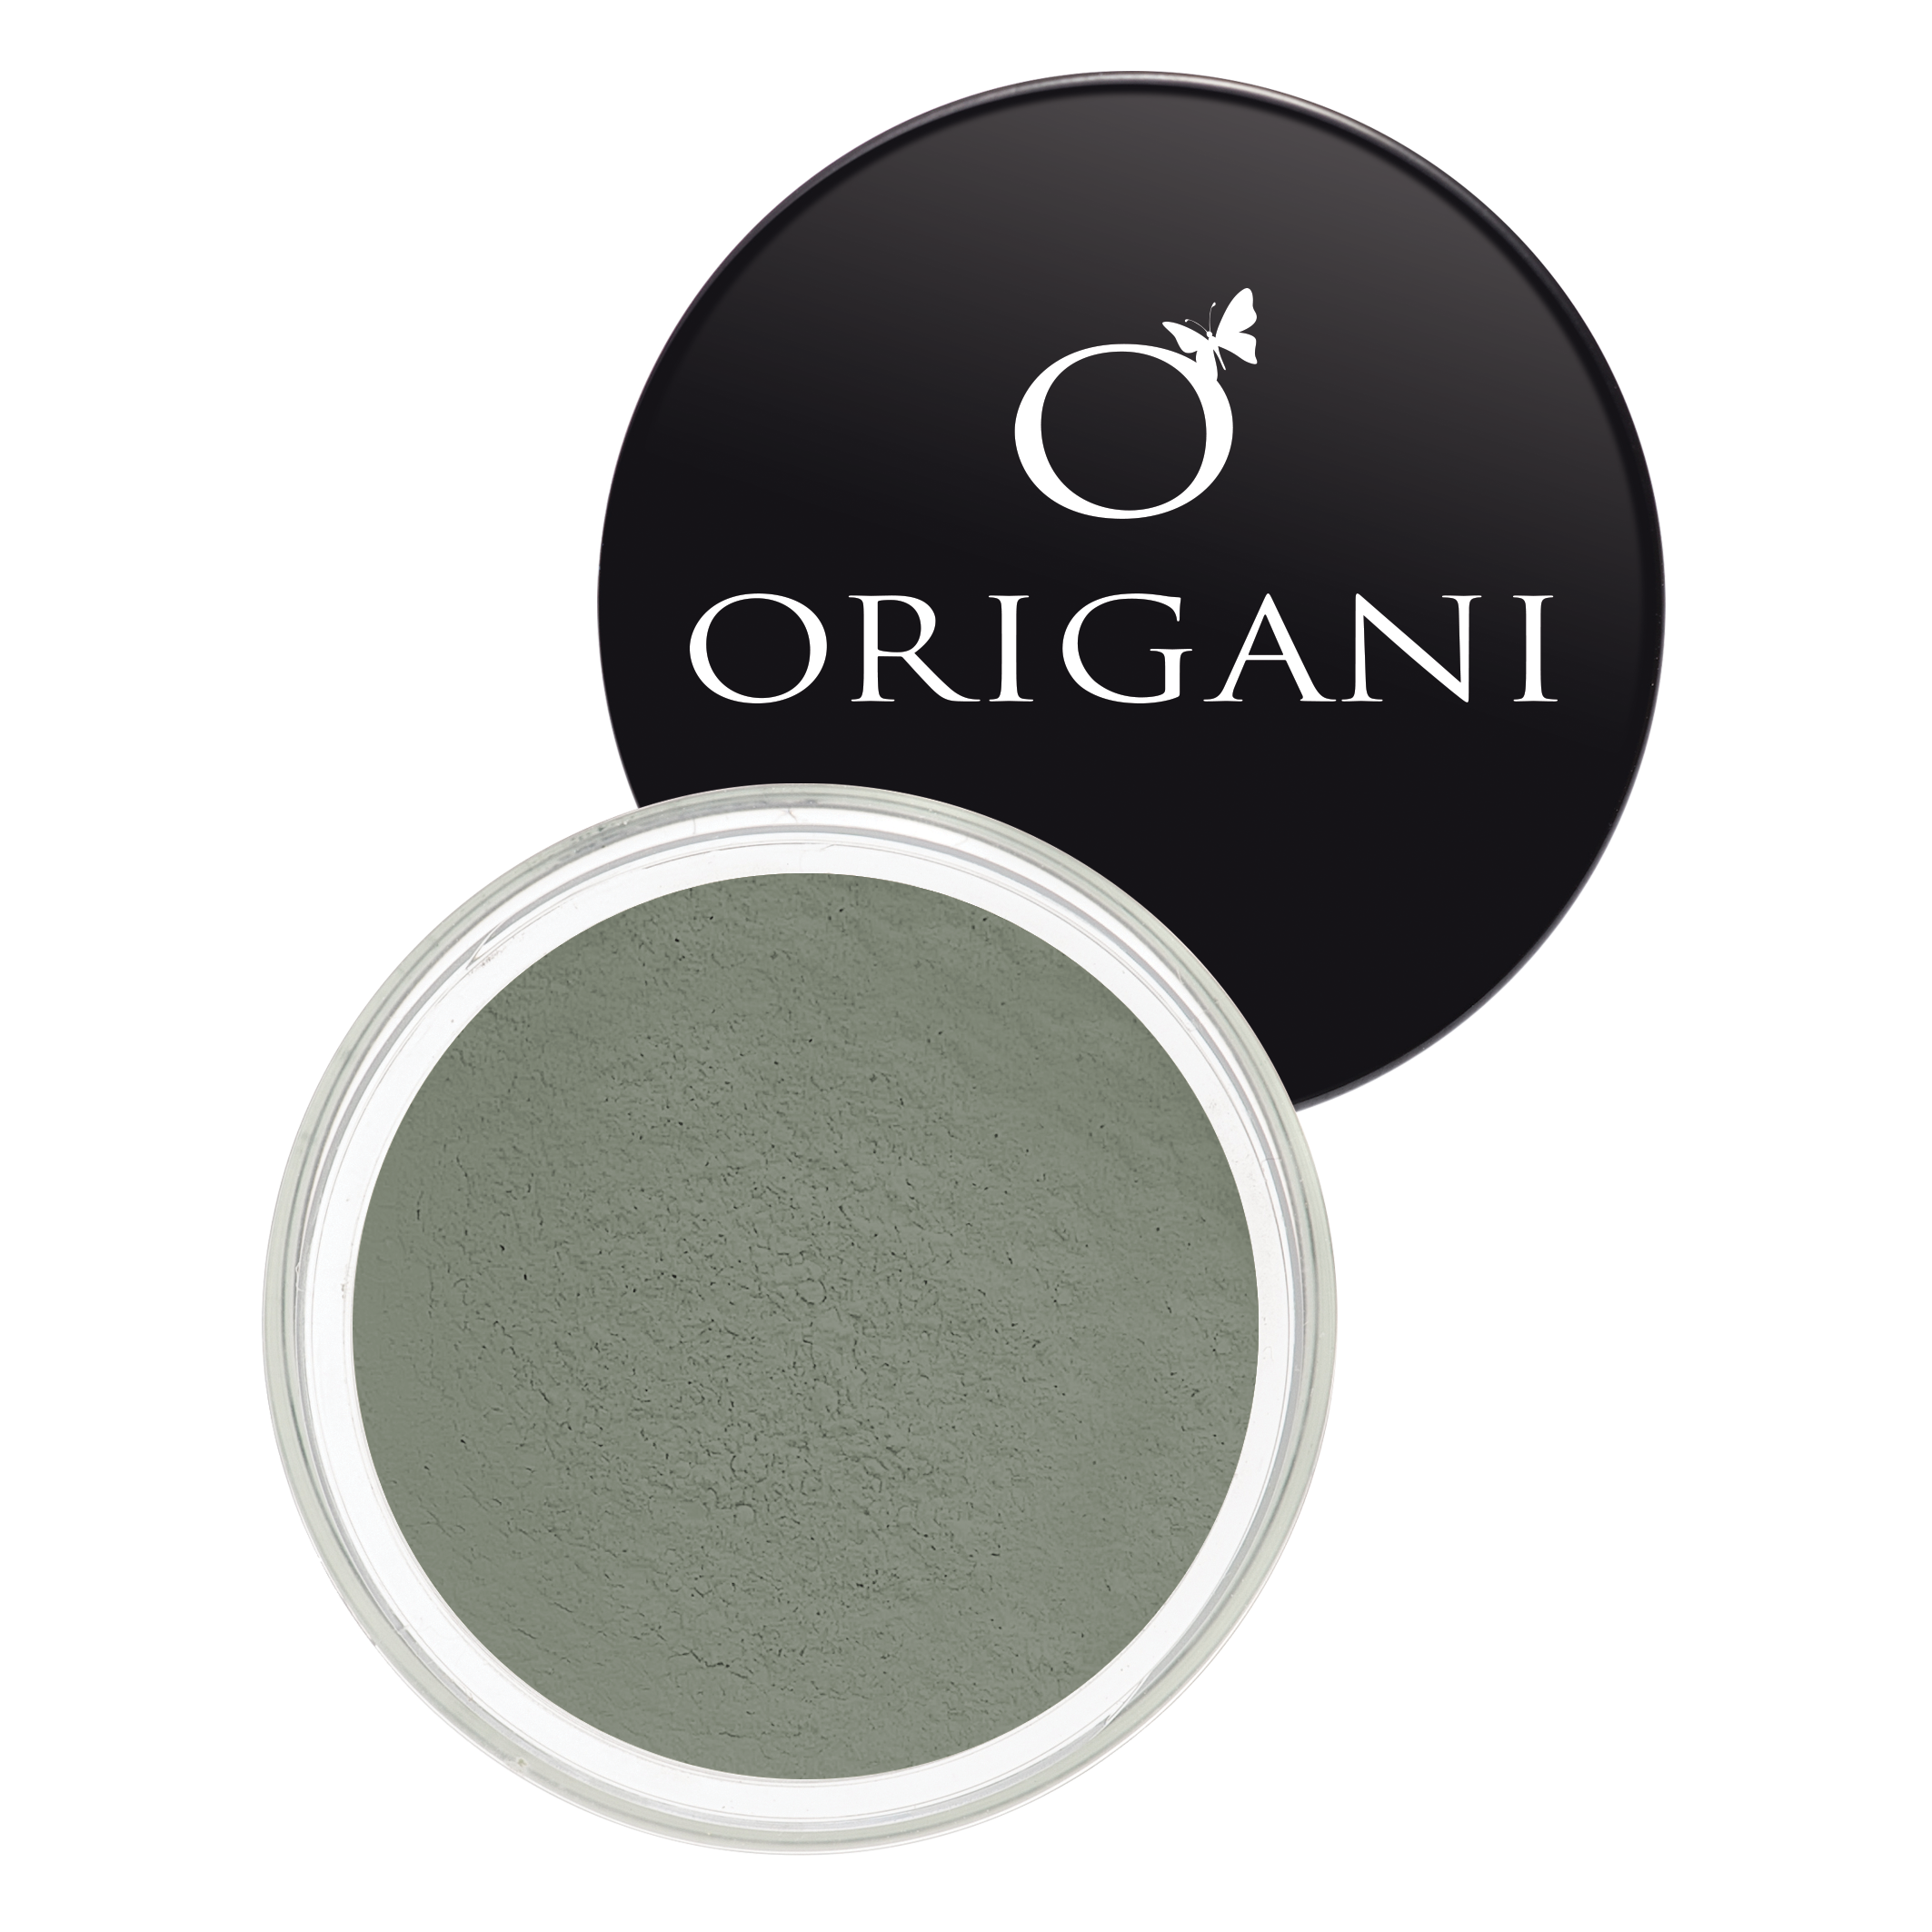 files/Origani-Mineral-Lover-Eye-Shadow-Emerald-Lace.png